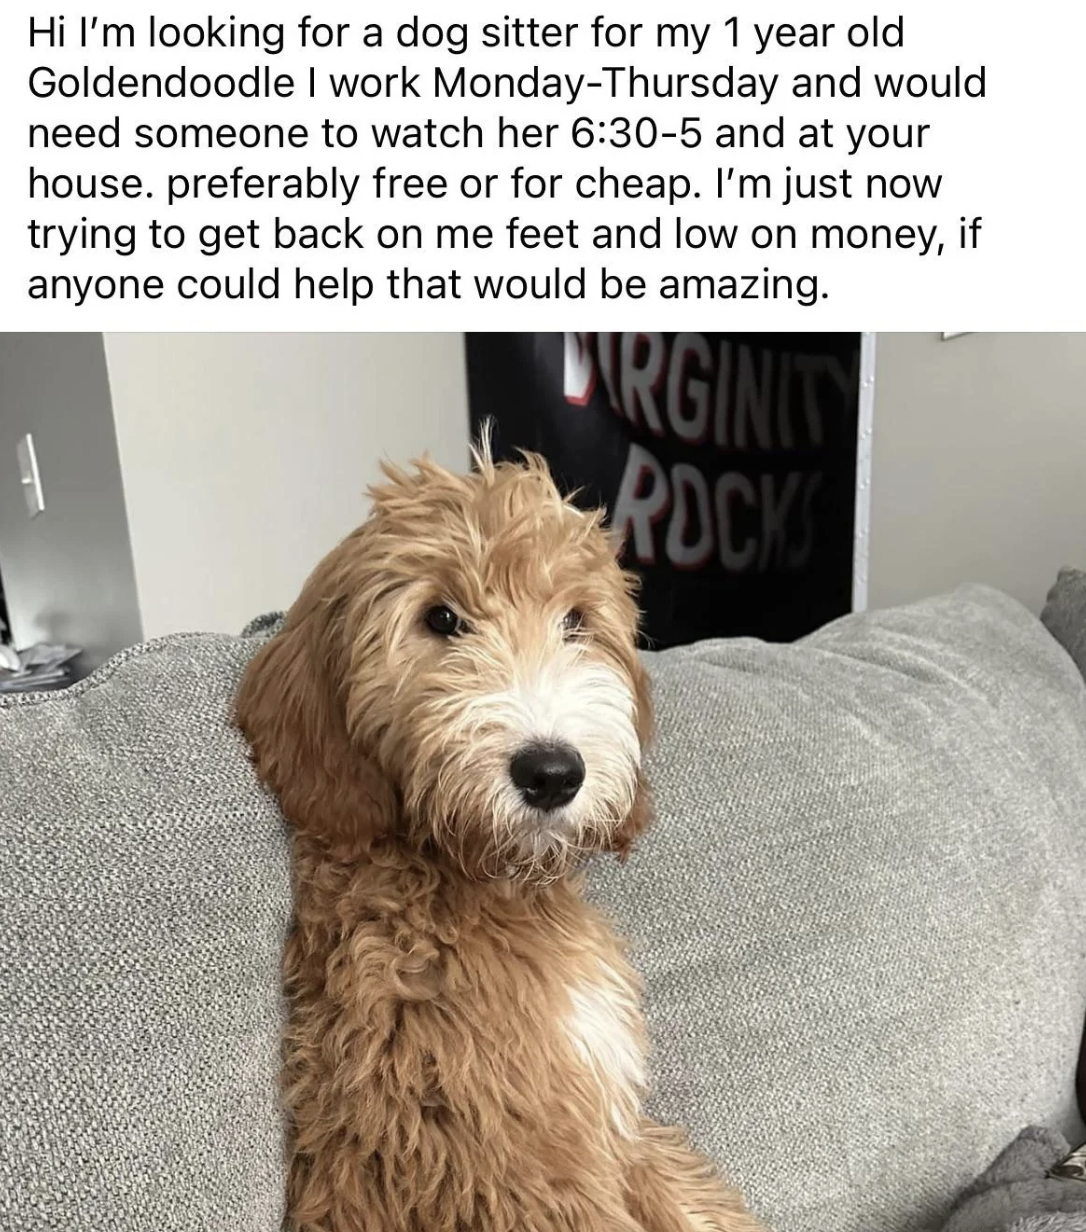 Person seeking a sitter for a 1-year-old goldendoodle, Monday–Thursday from 6:30 to 5, at the sitter&#x27;s house, preferably for free or cheap